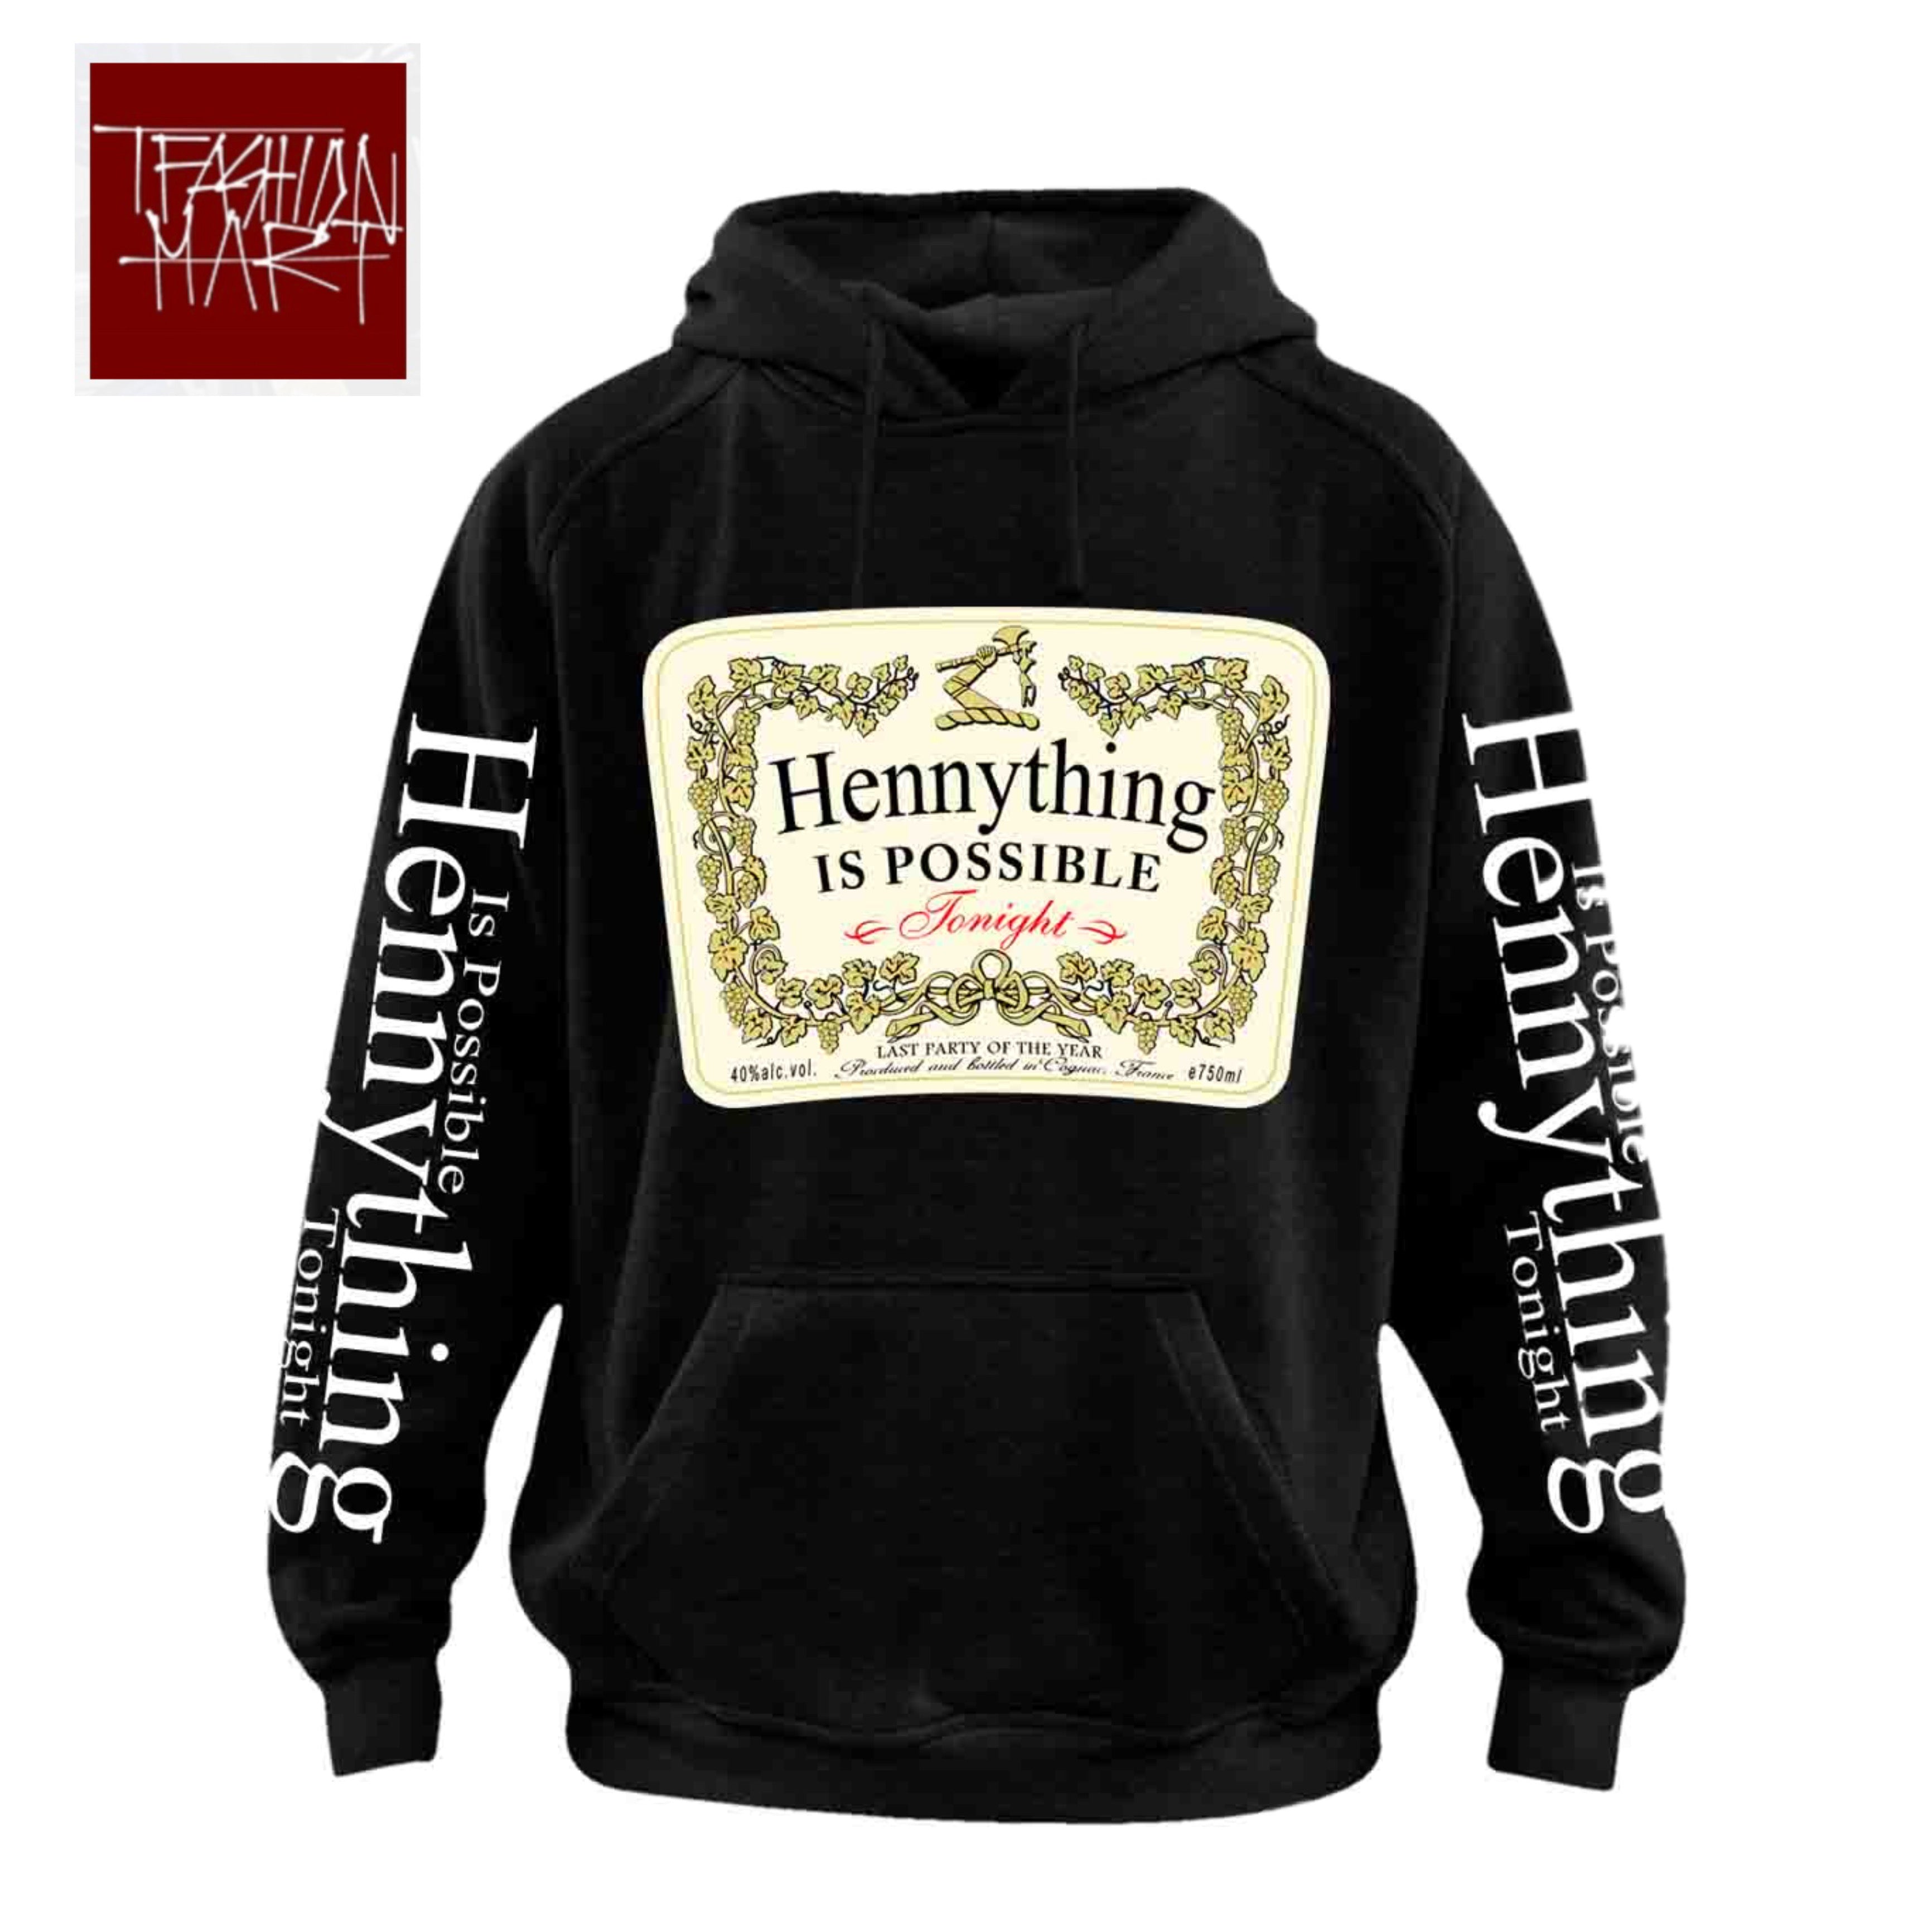 TFashion Graphic Hoodie - Hennything Is Possible